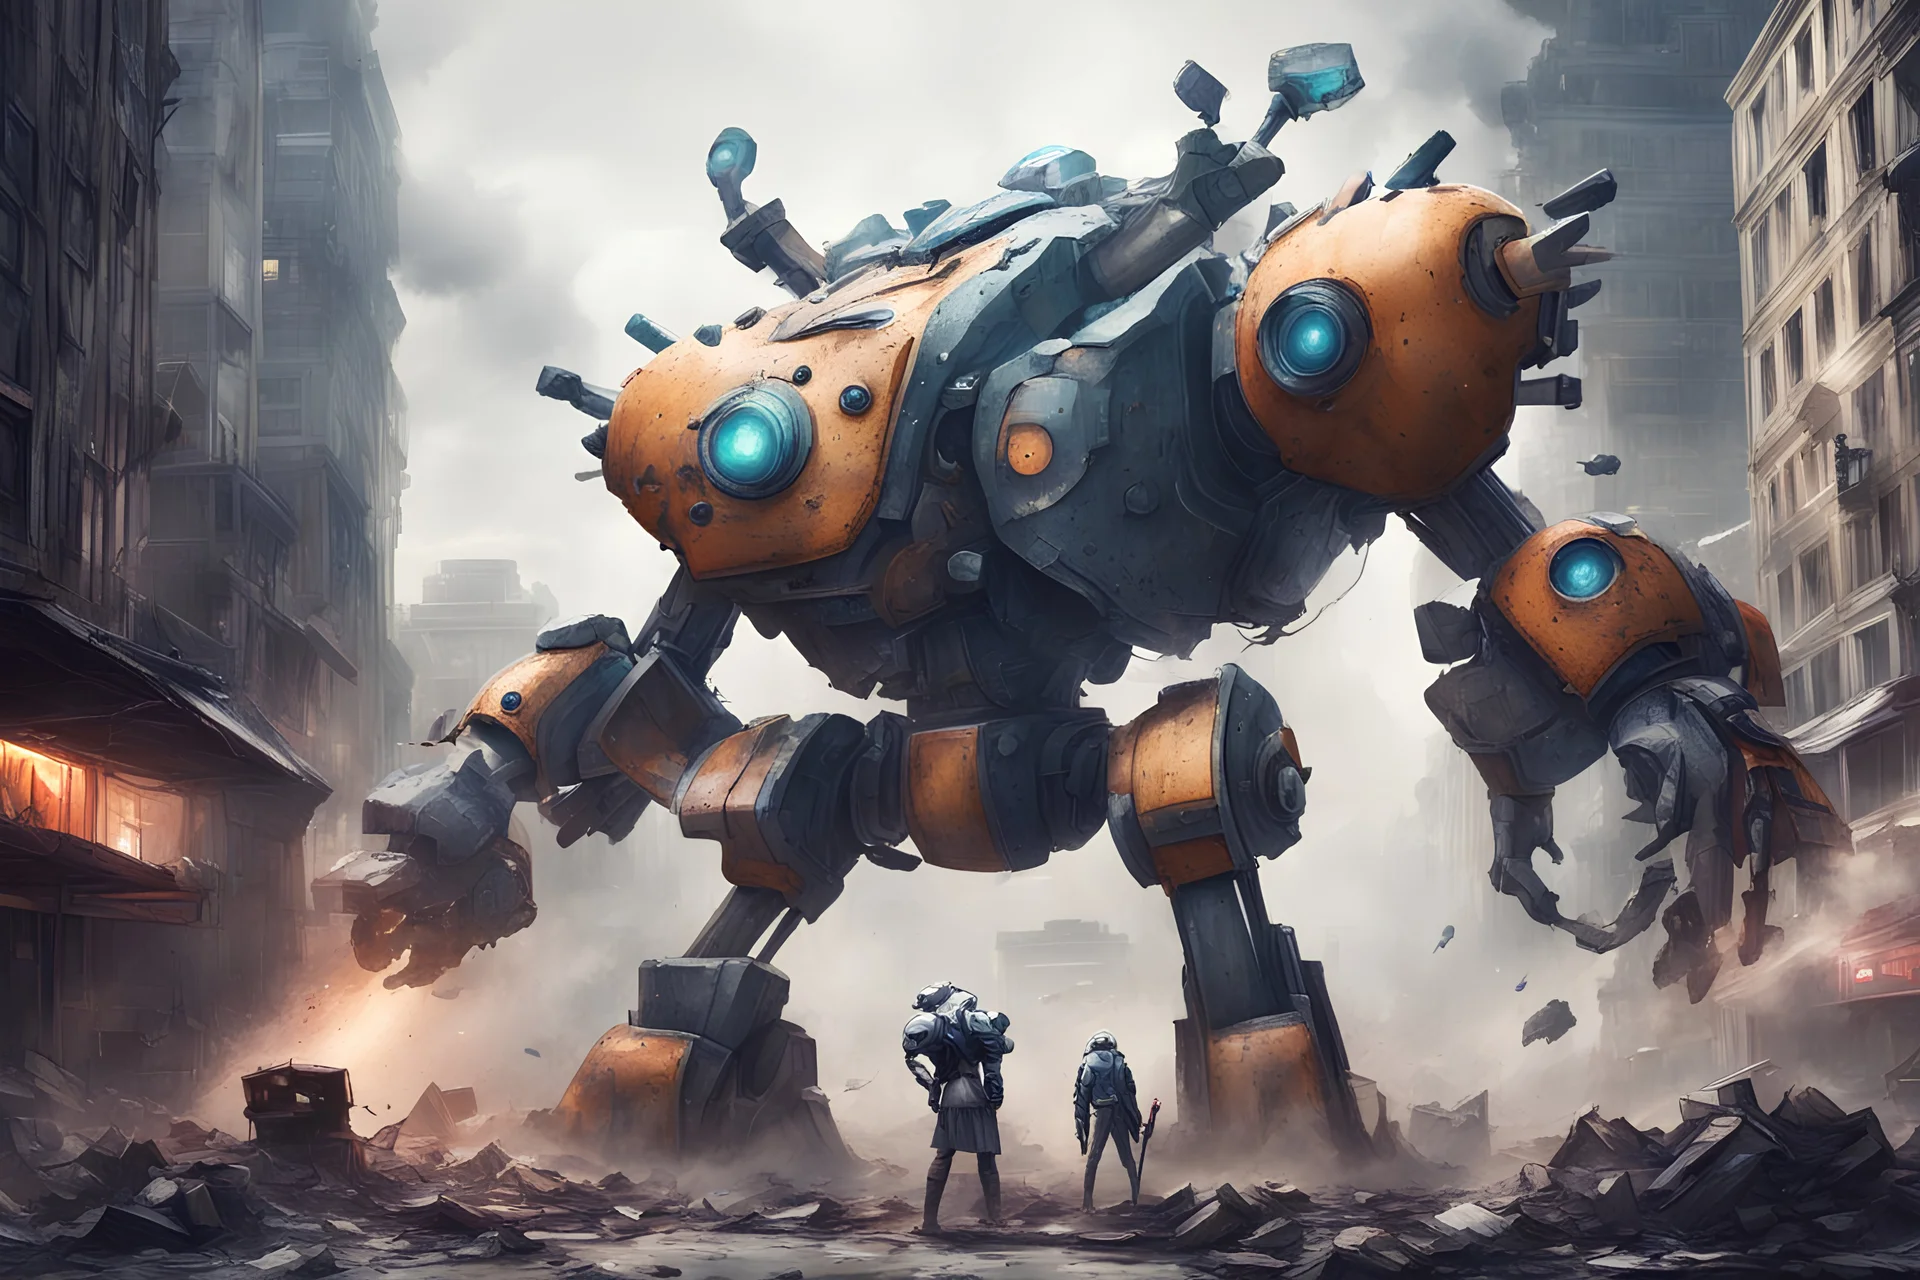 mega mech fighting against big size of bacteria monster, in town, destruction, chaos